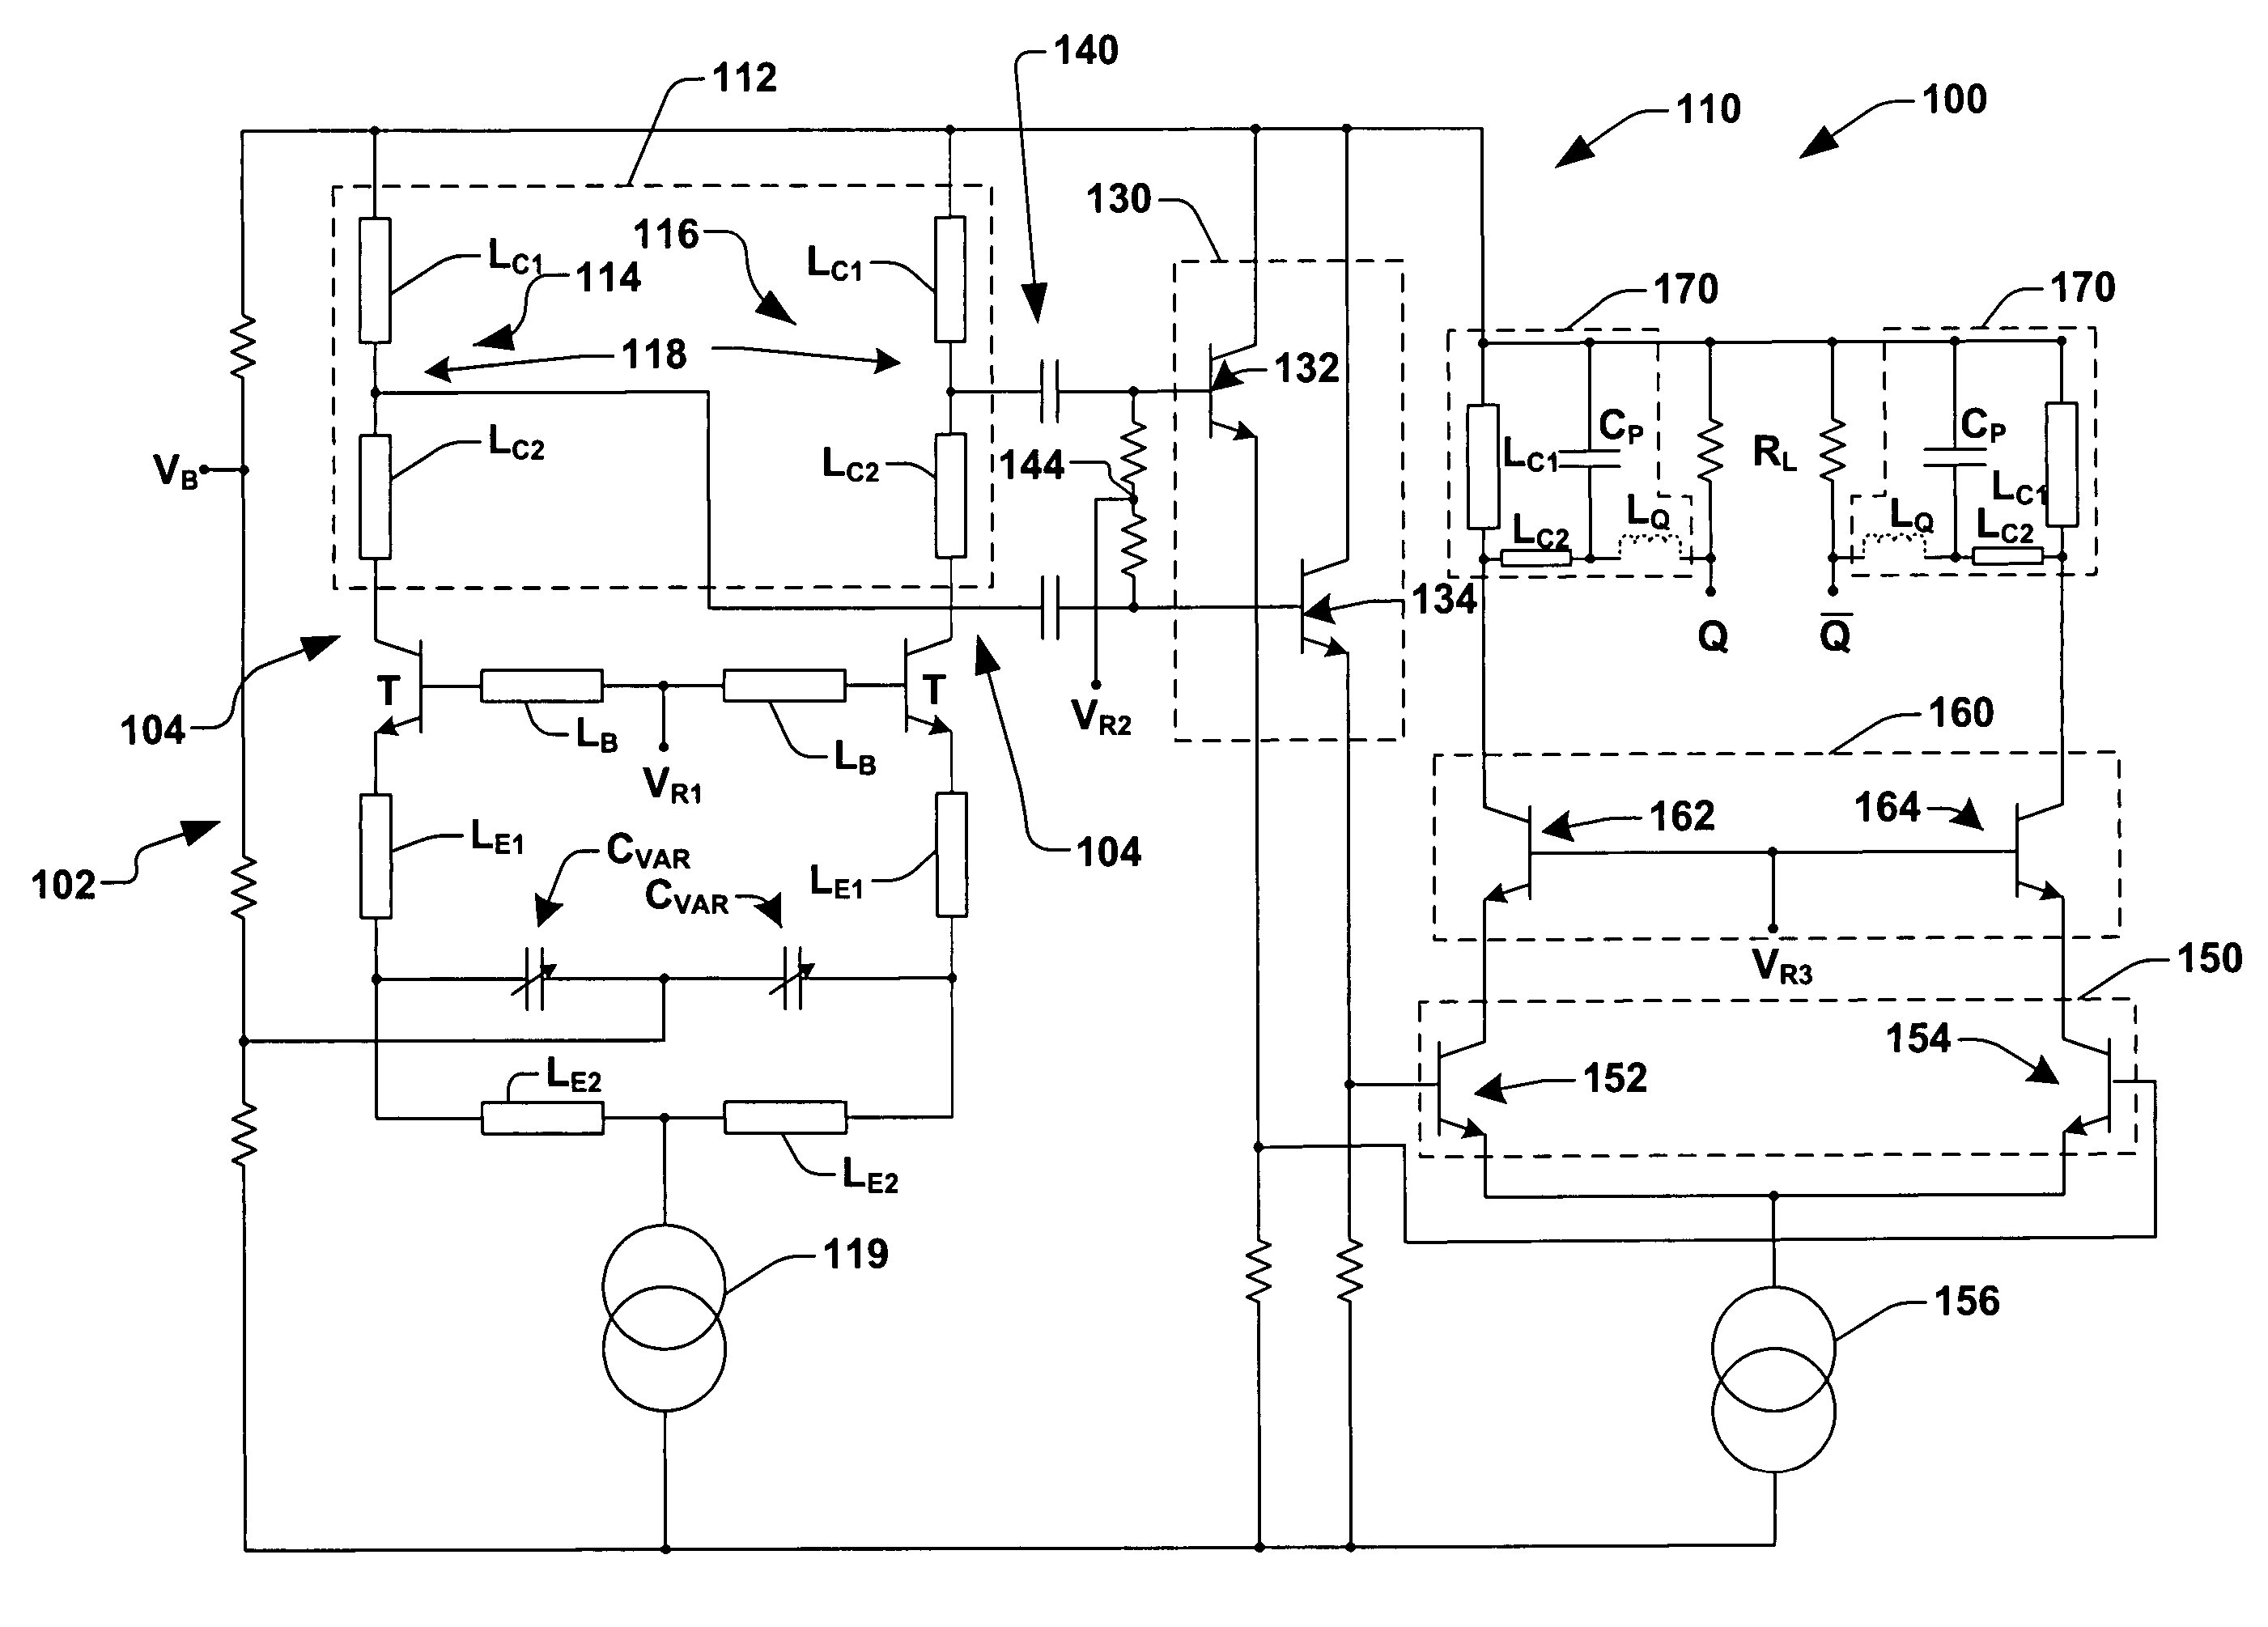 Voltage controlled oscillator (VCO) with output buffer